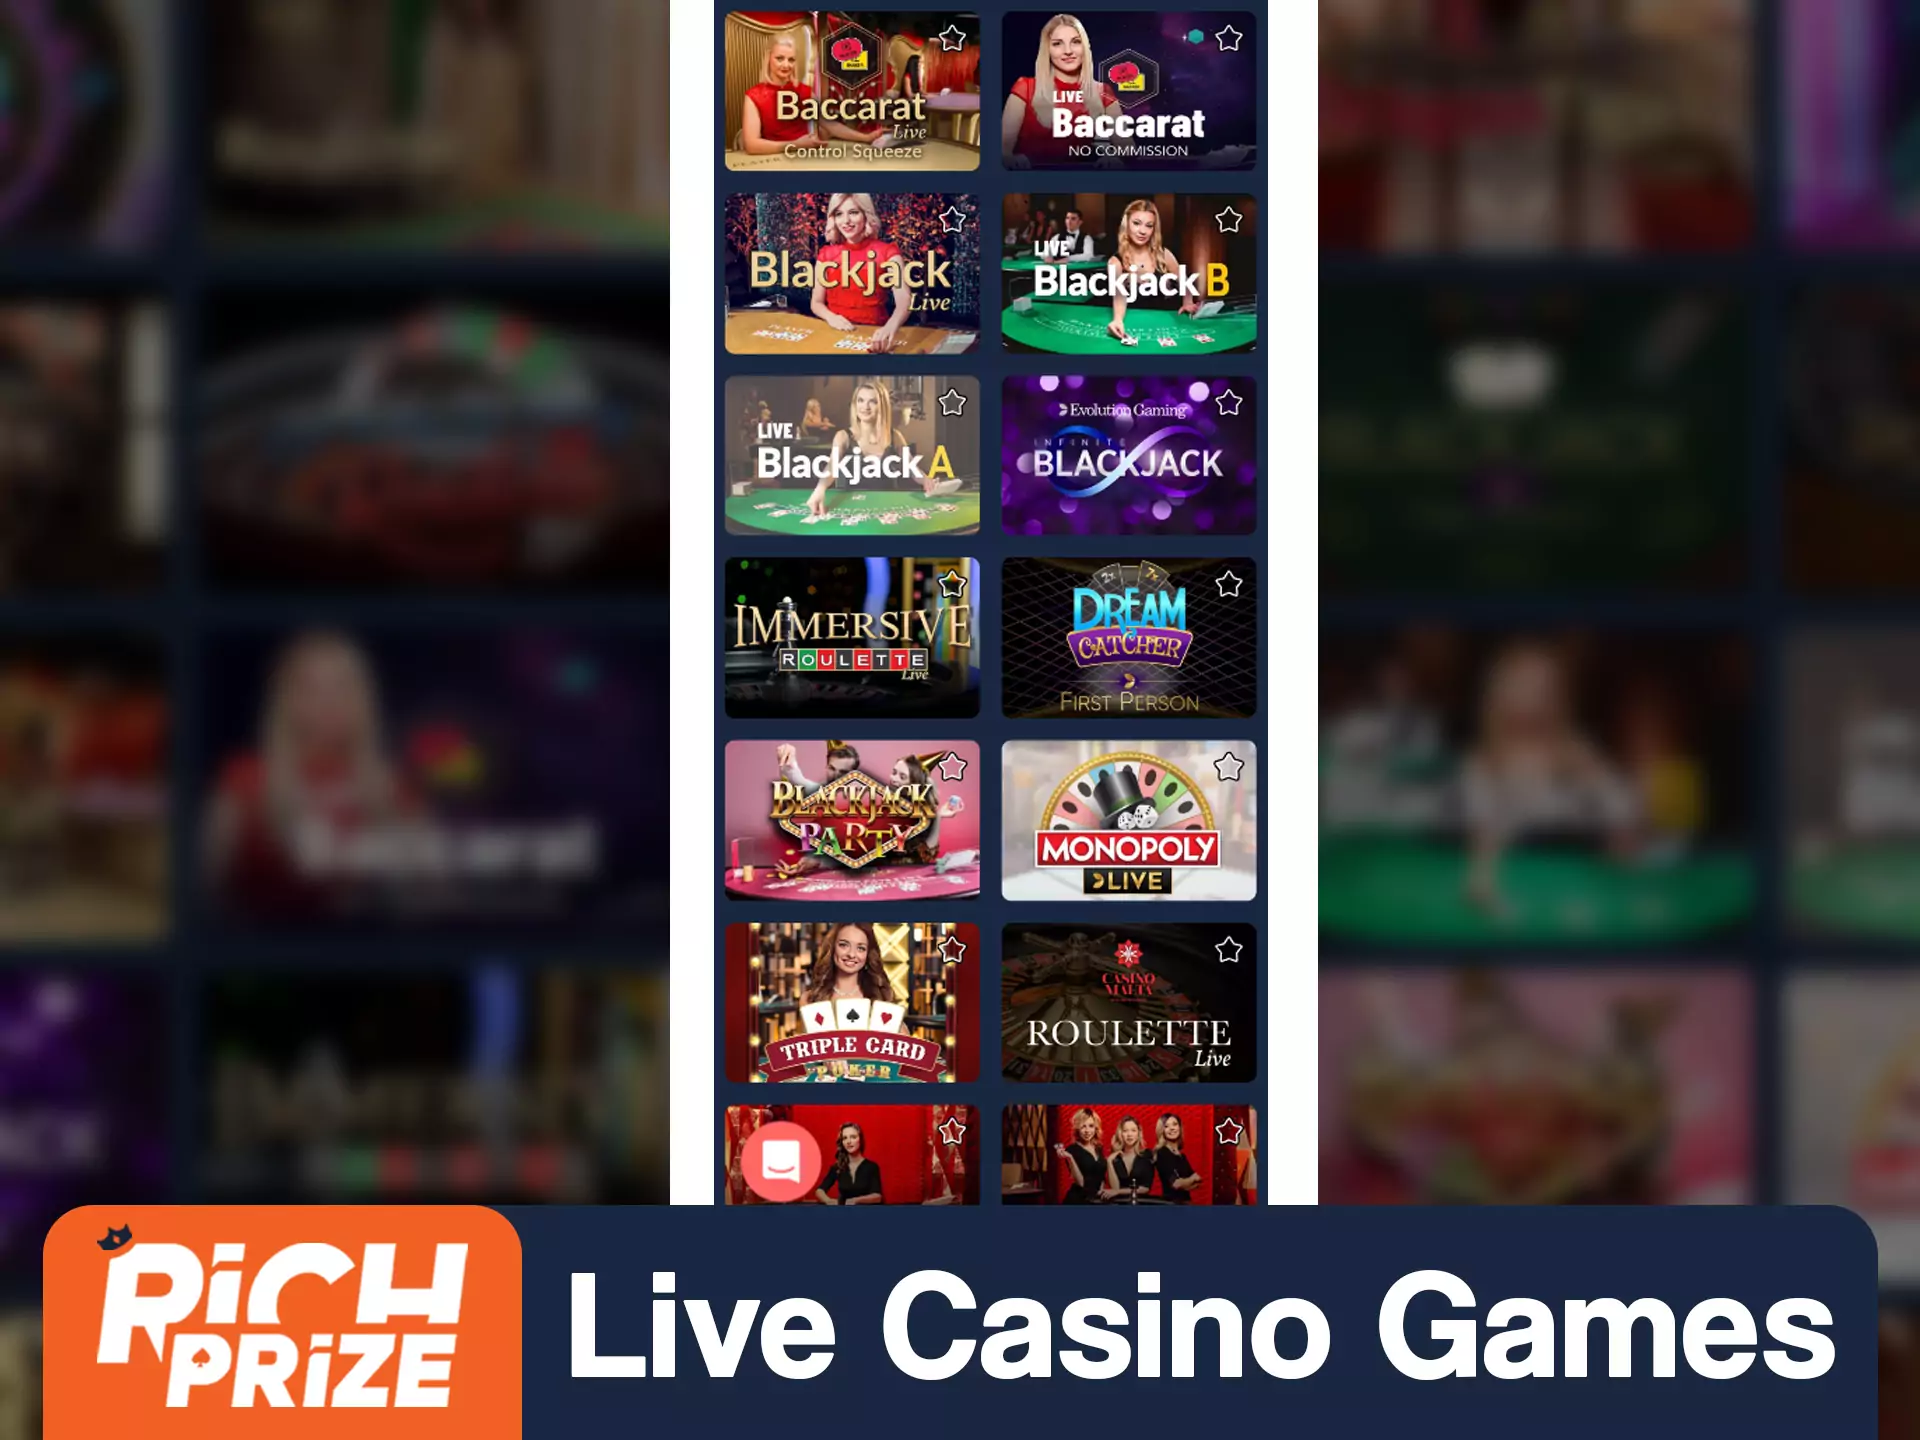 Play live format RichPrize casinos.